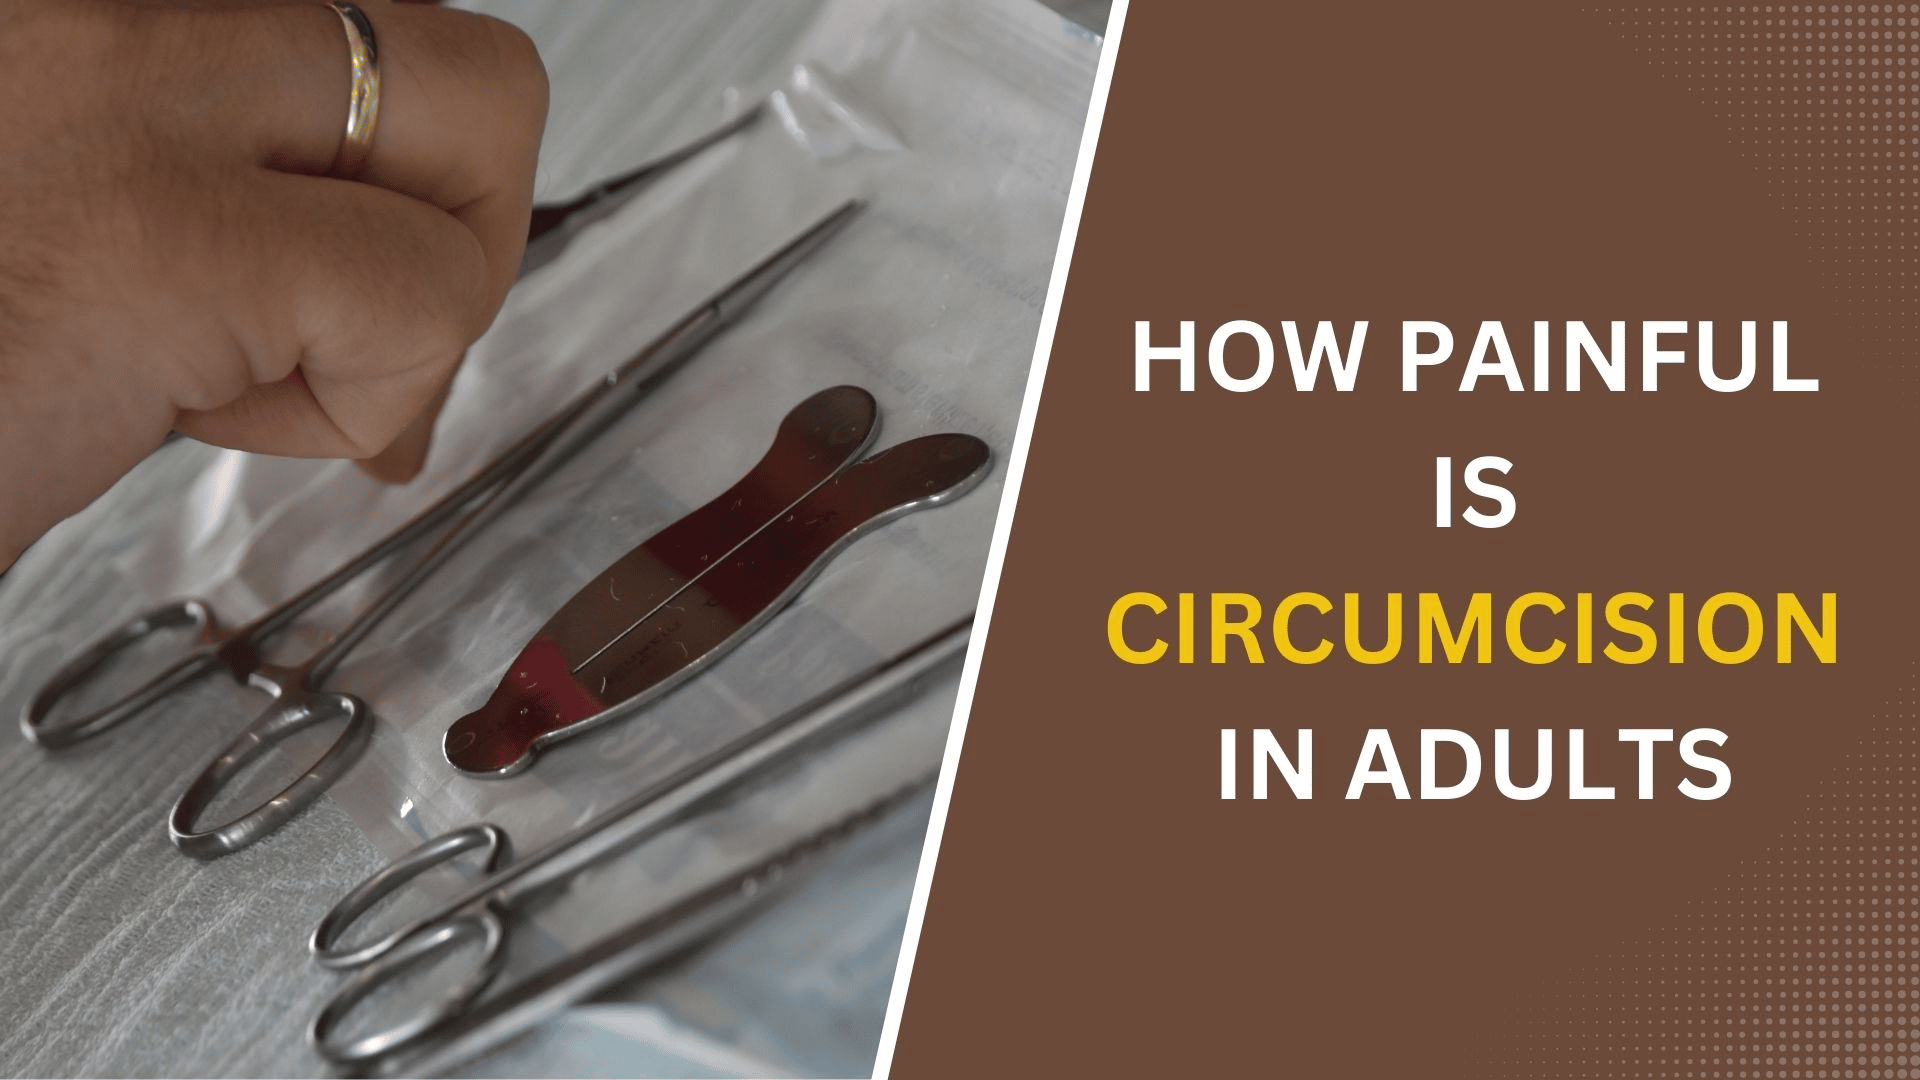 Adult Male Circumcision Before And After